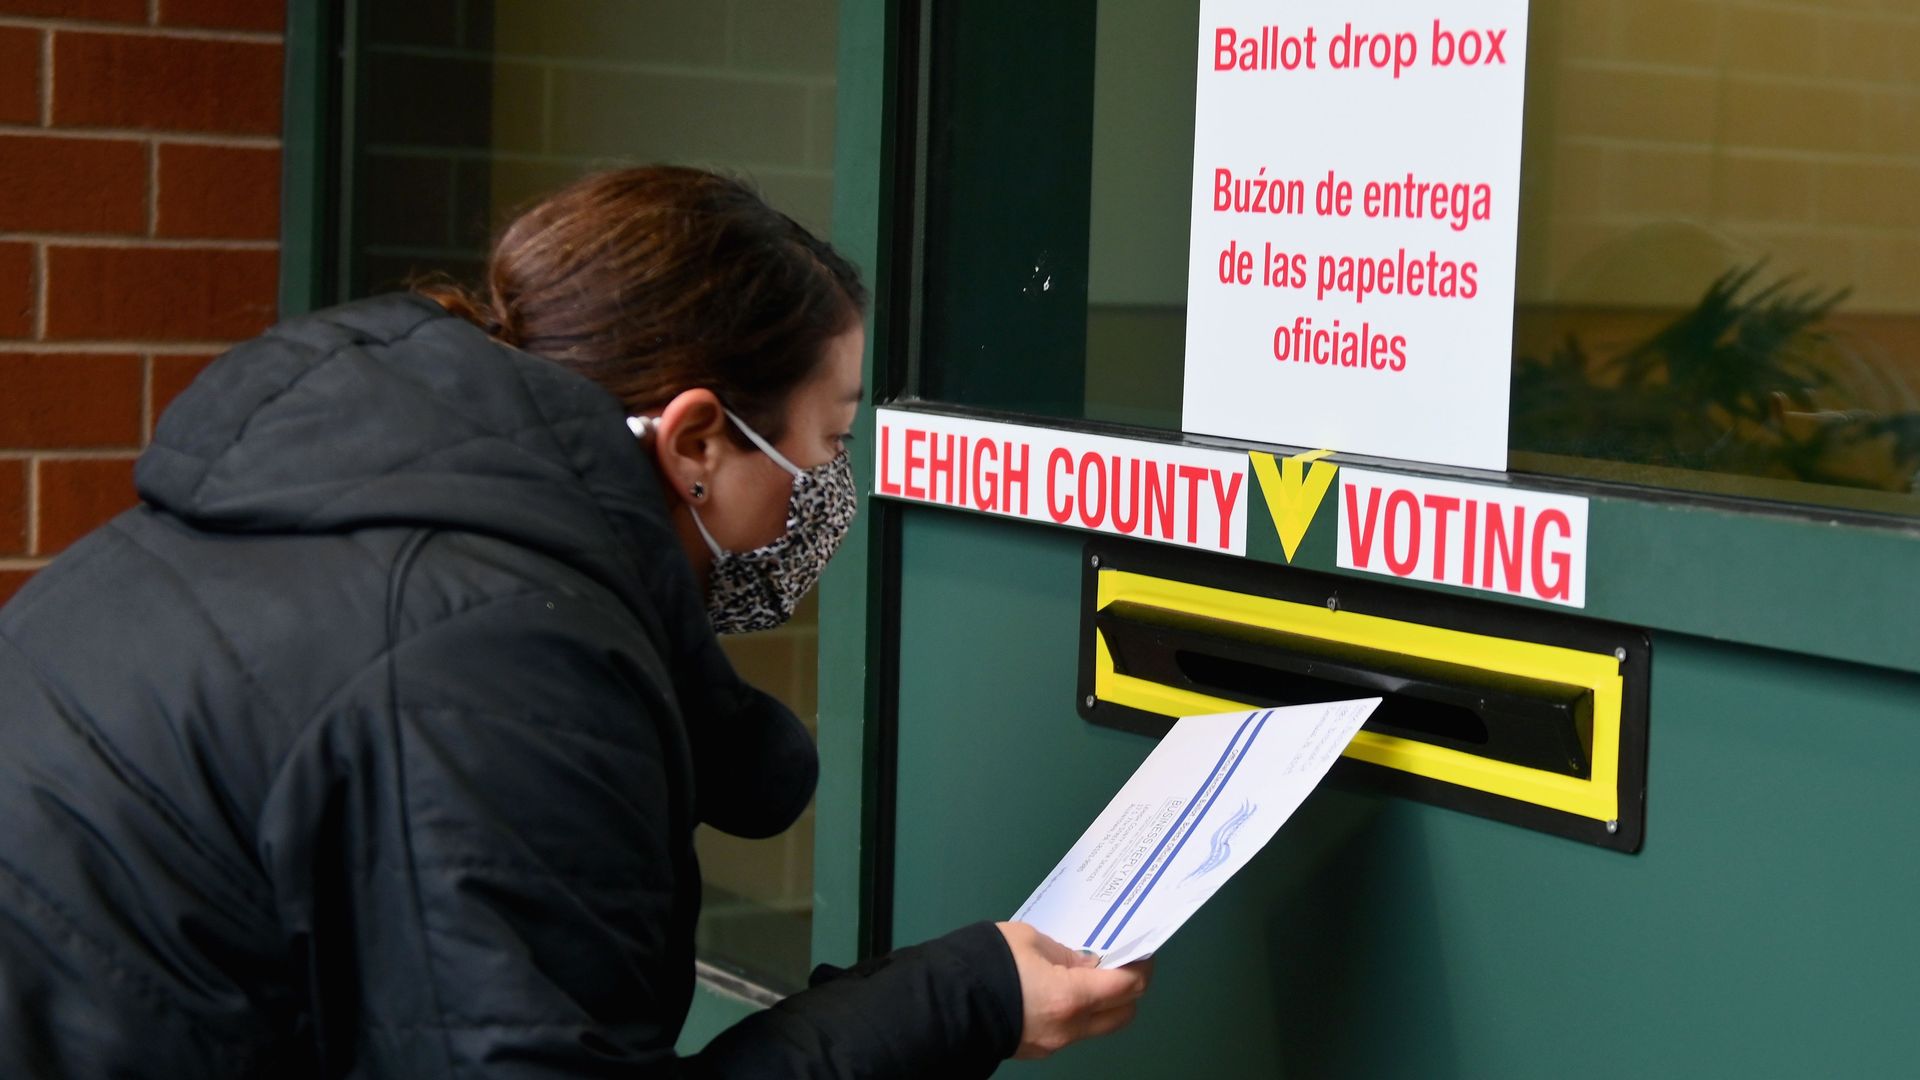 A voter arrives to drop off her ballot during early voting in Allentown, Pennsylvania on Oct. 29, 2020. 